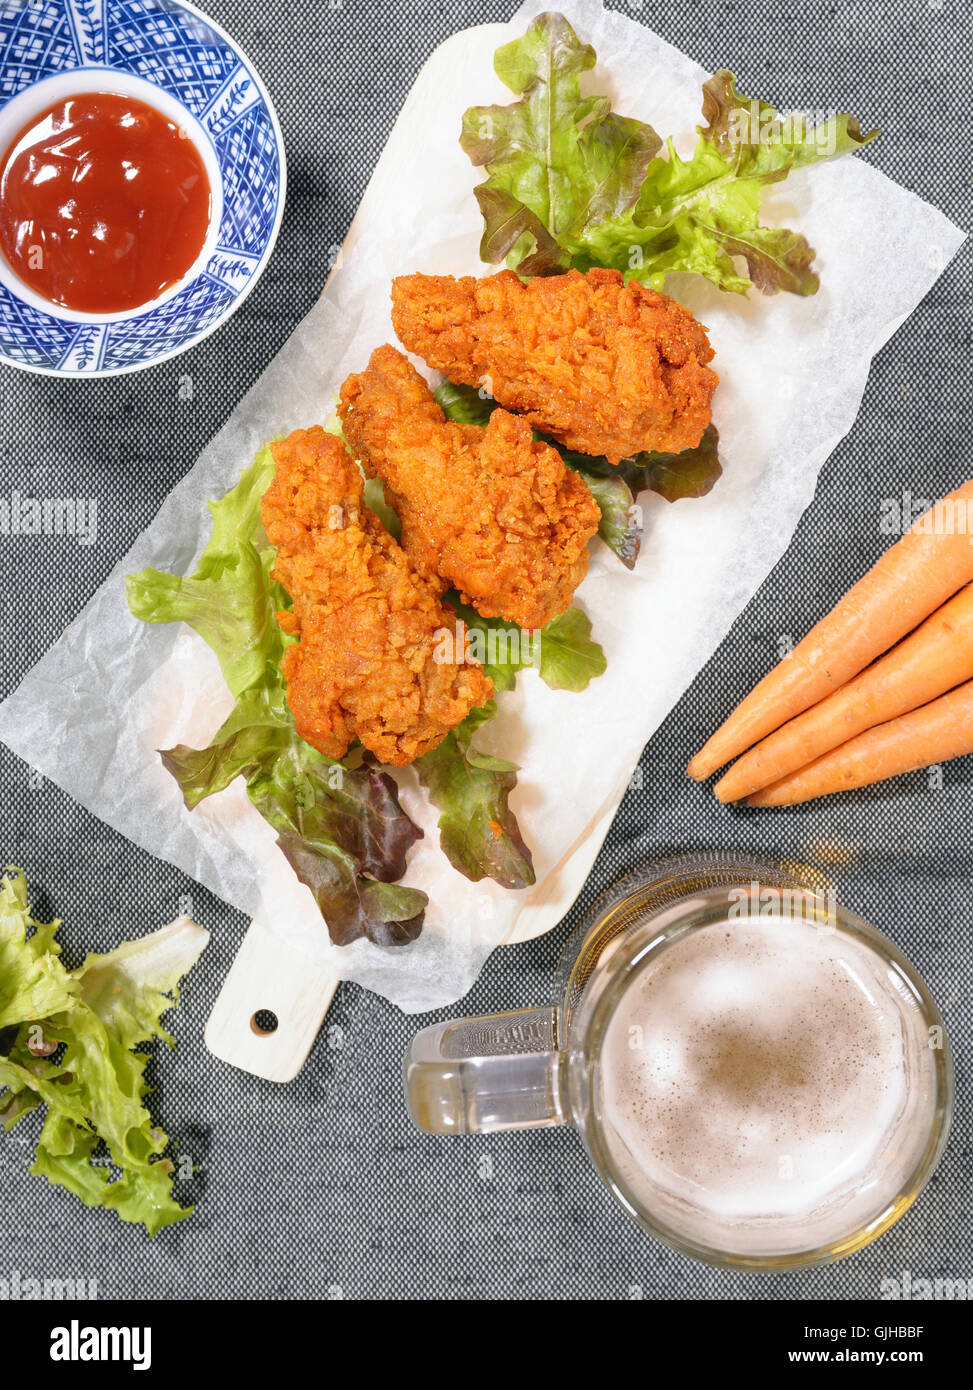 Fried chicken wing with beer and carrot Stock Photo